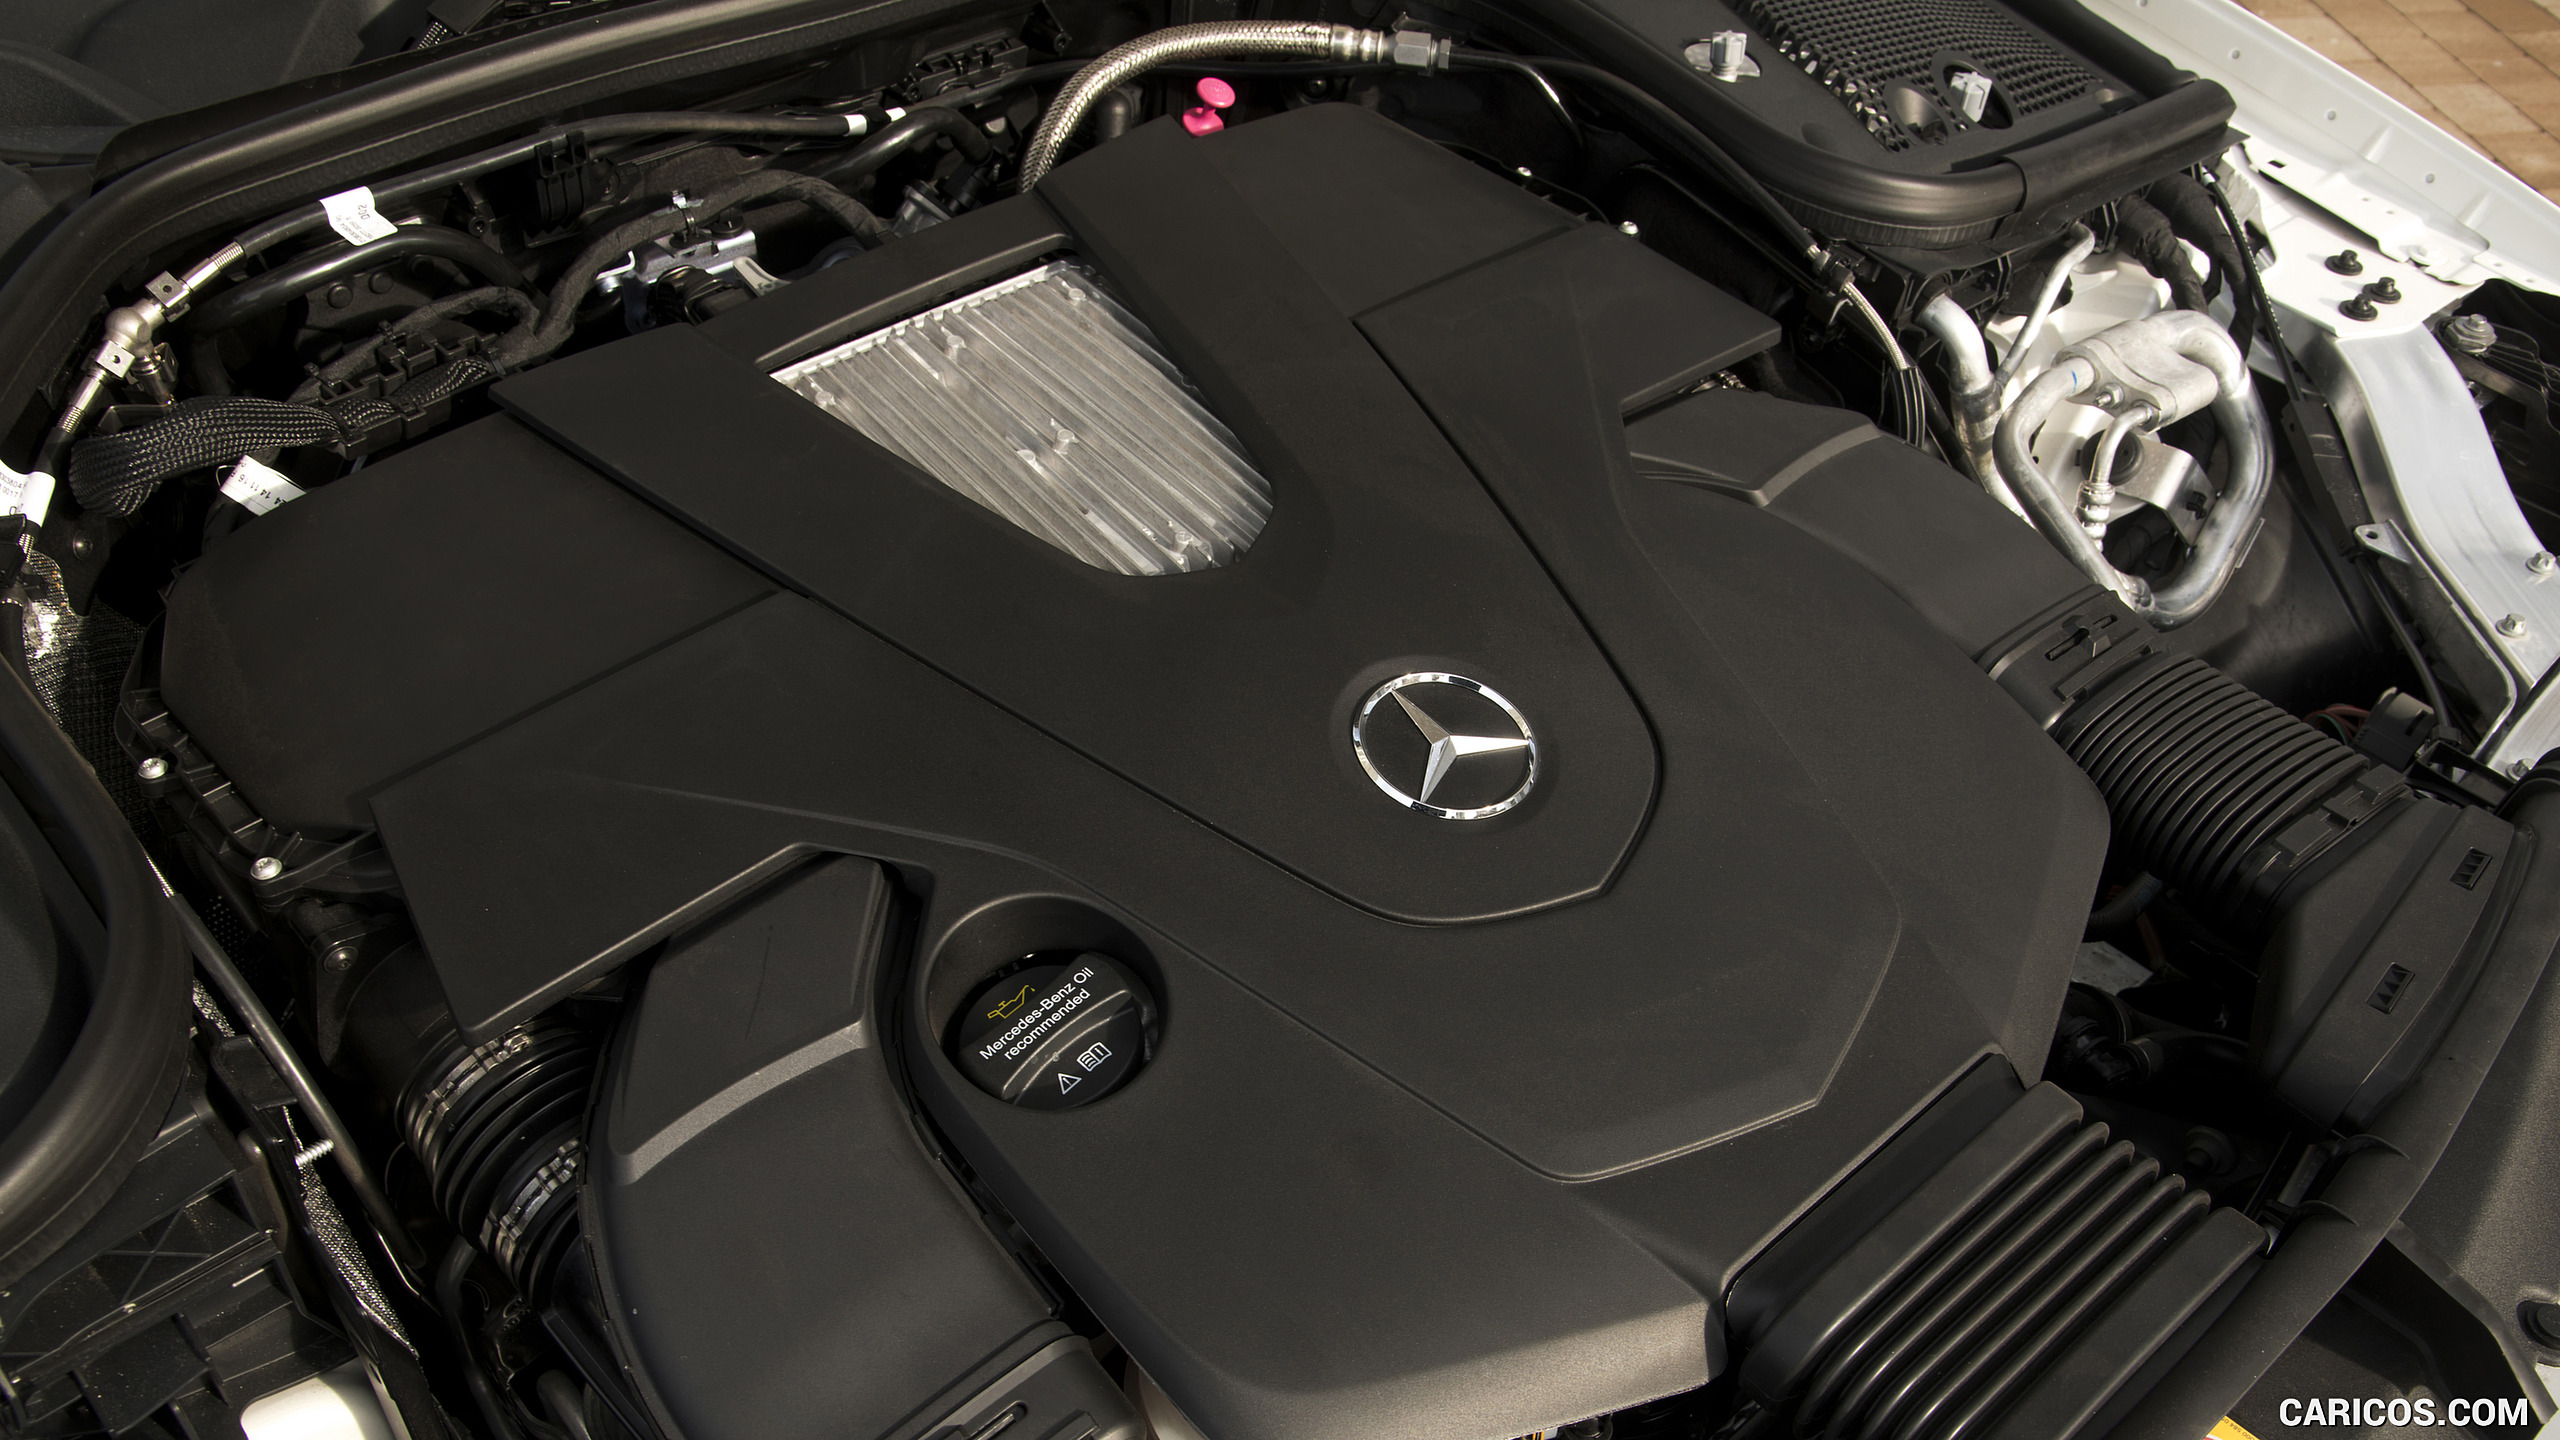 2018 Mercedes-Benz E400 Coupe 4MATIC - Engine, #150 of 365